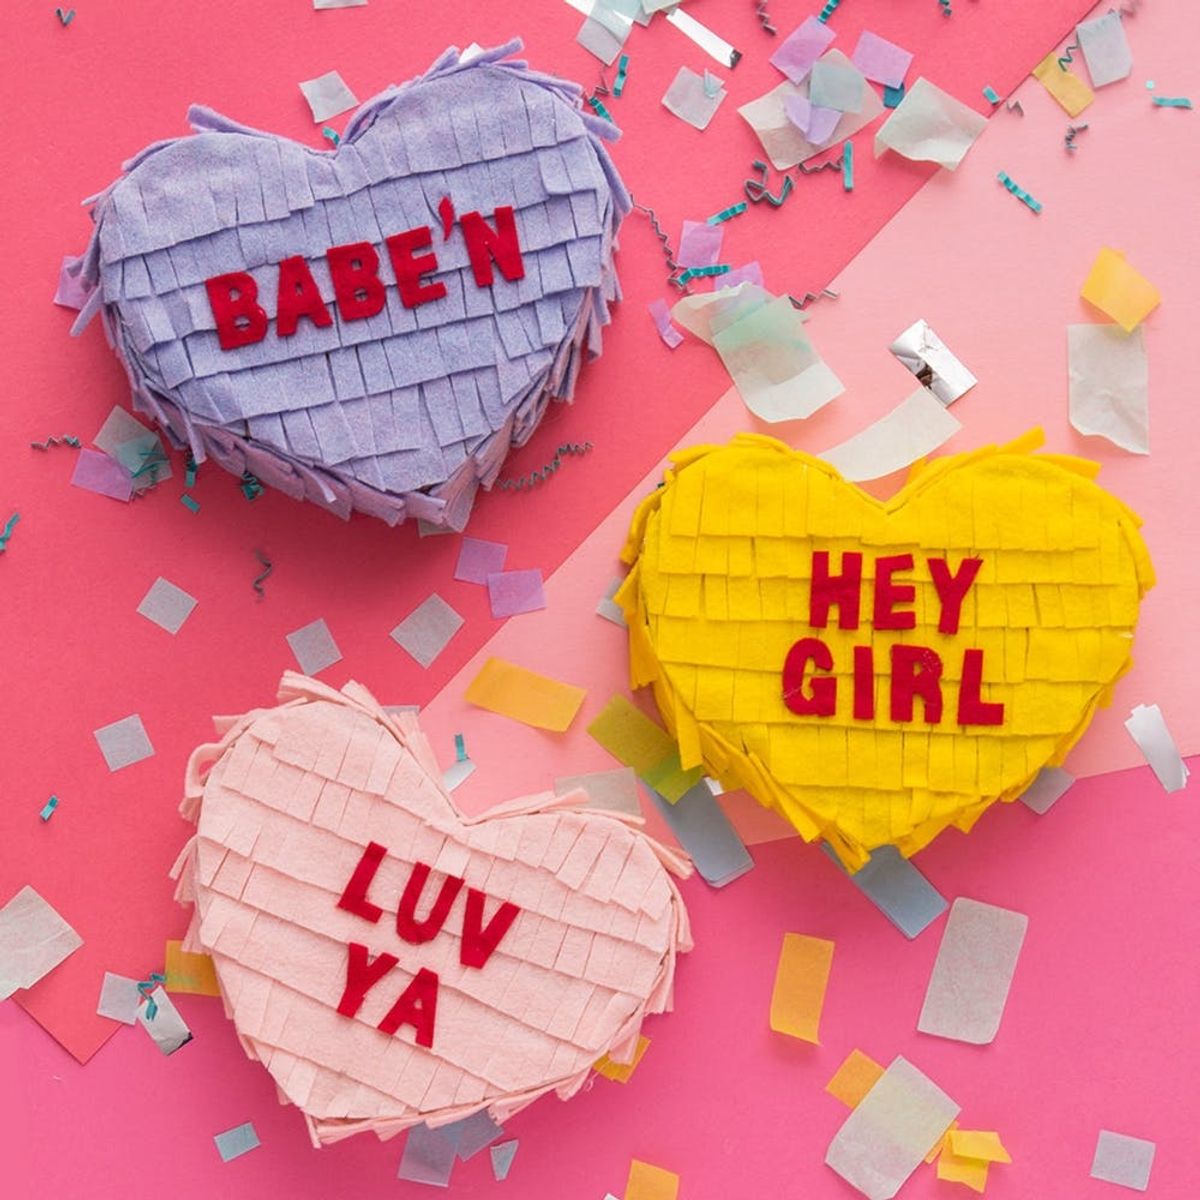 Make These Conversation Heart Piñata Care Packages for Your BFFs